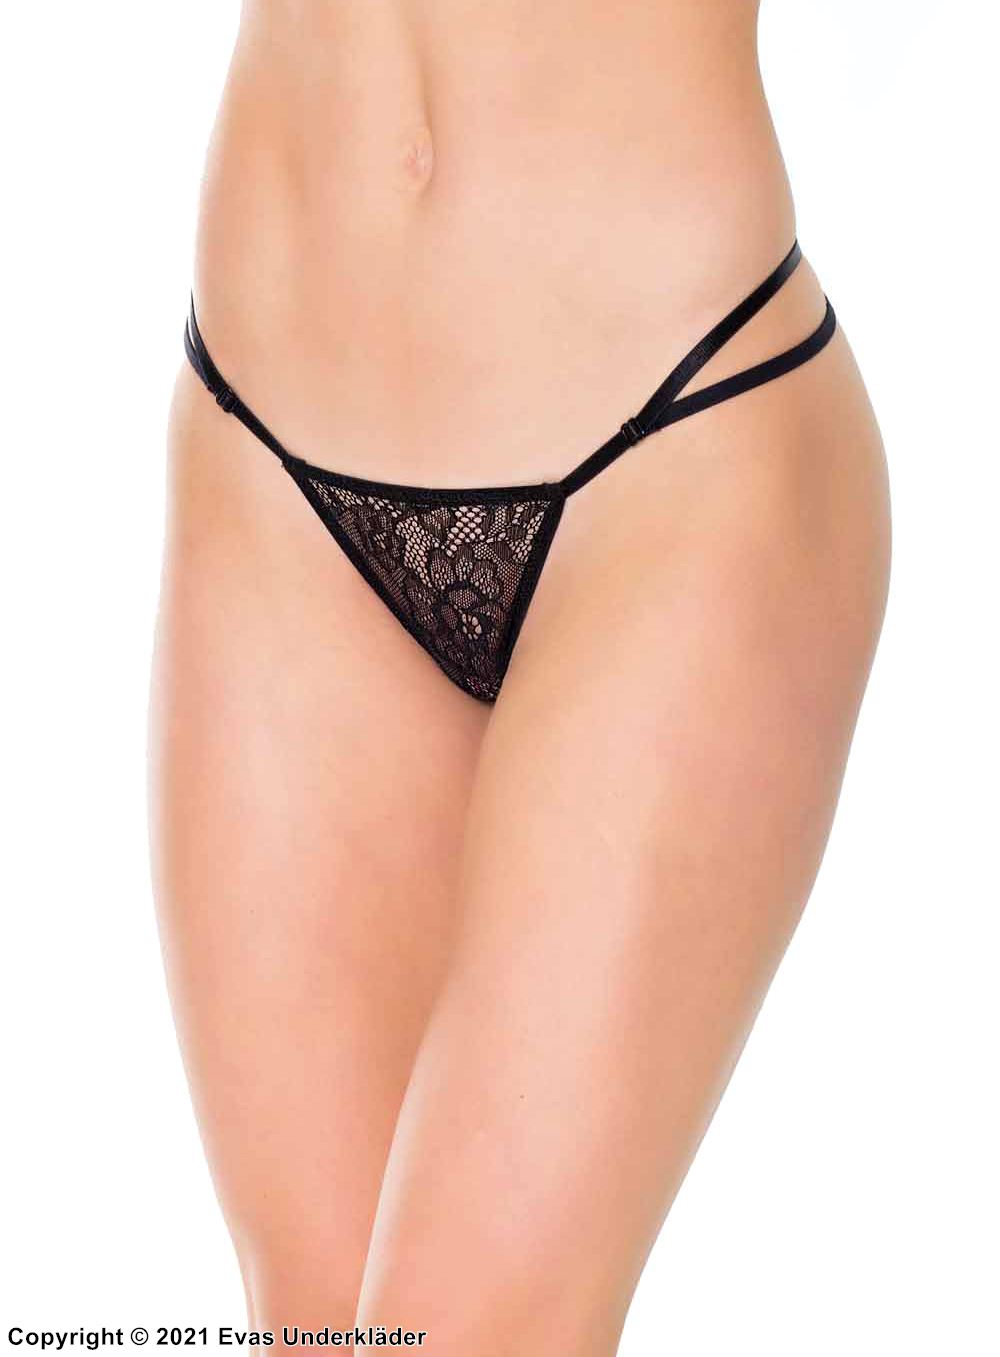 Minimal G-string, floral lace, double straps